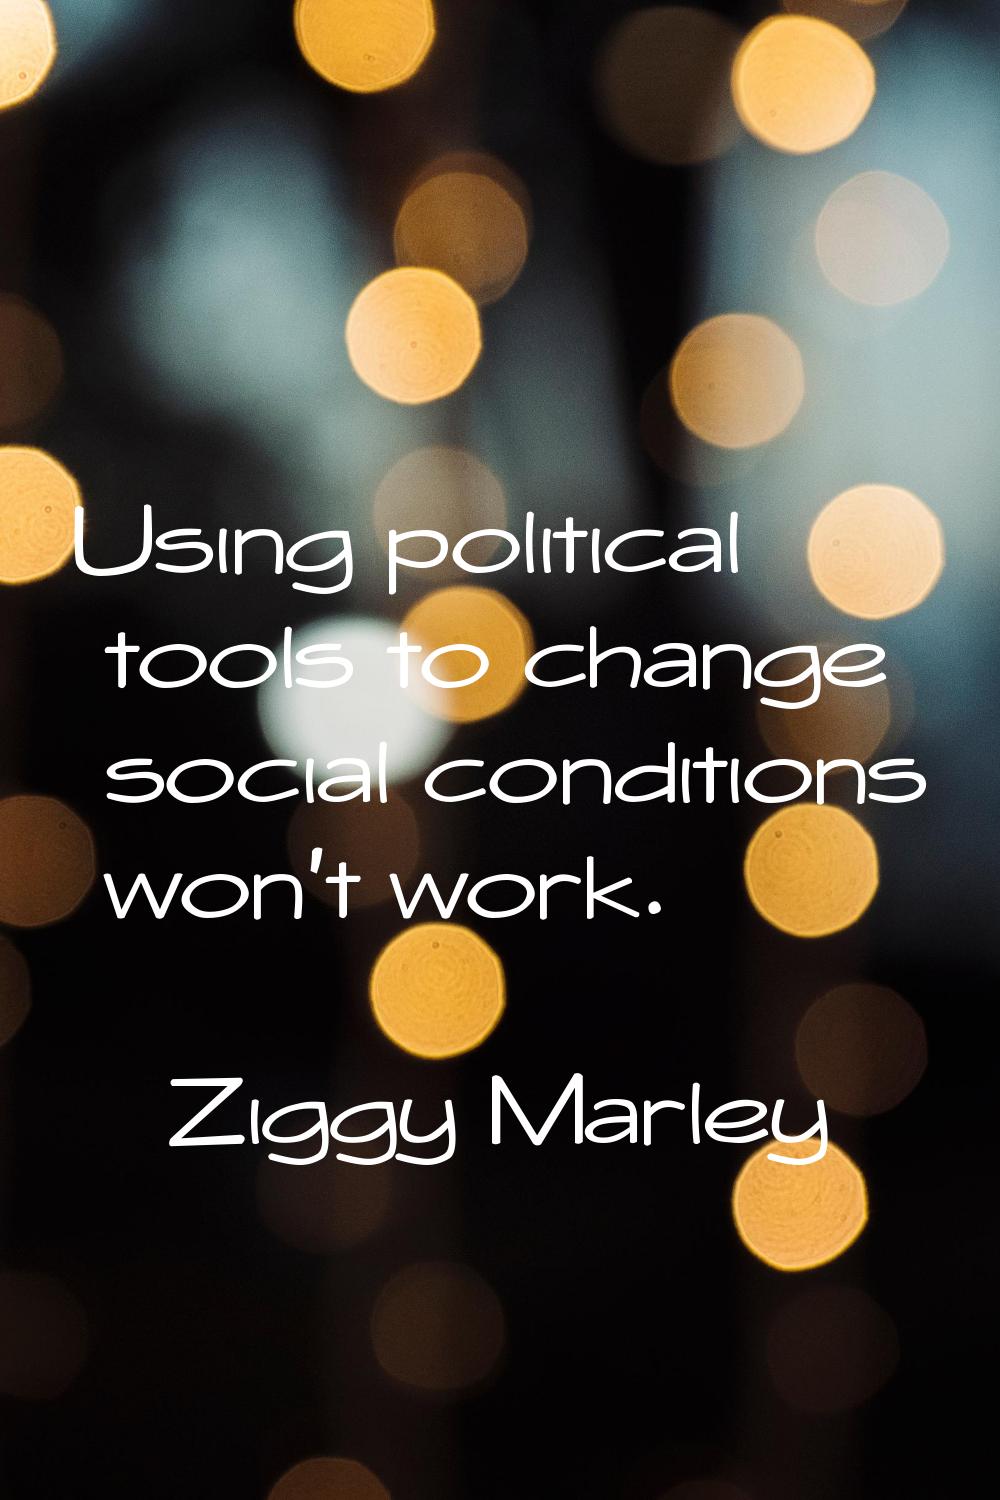 Using political tools to change social conditions won't work.